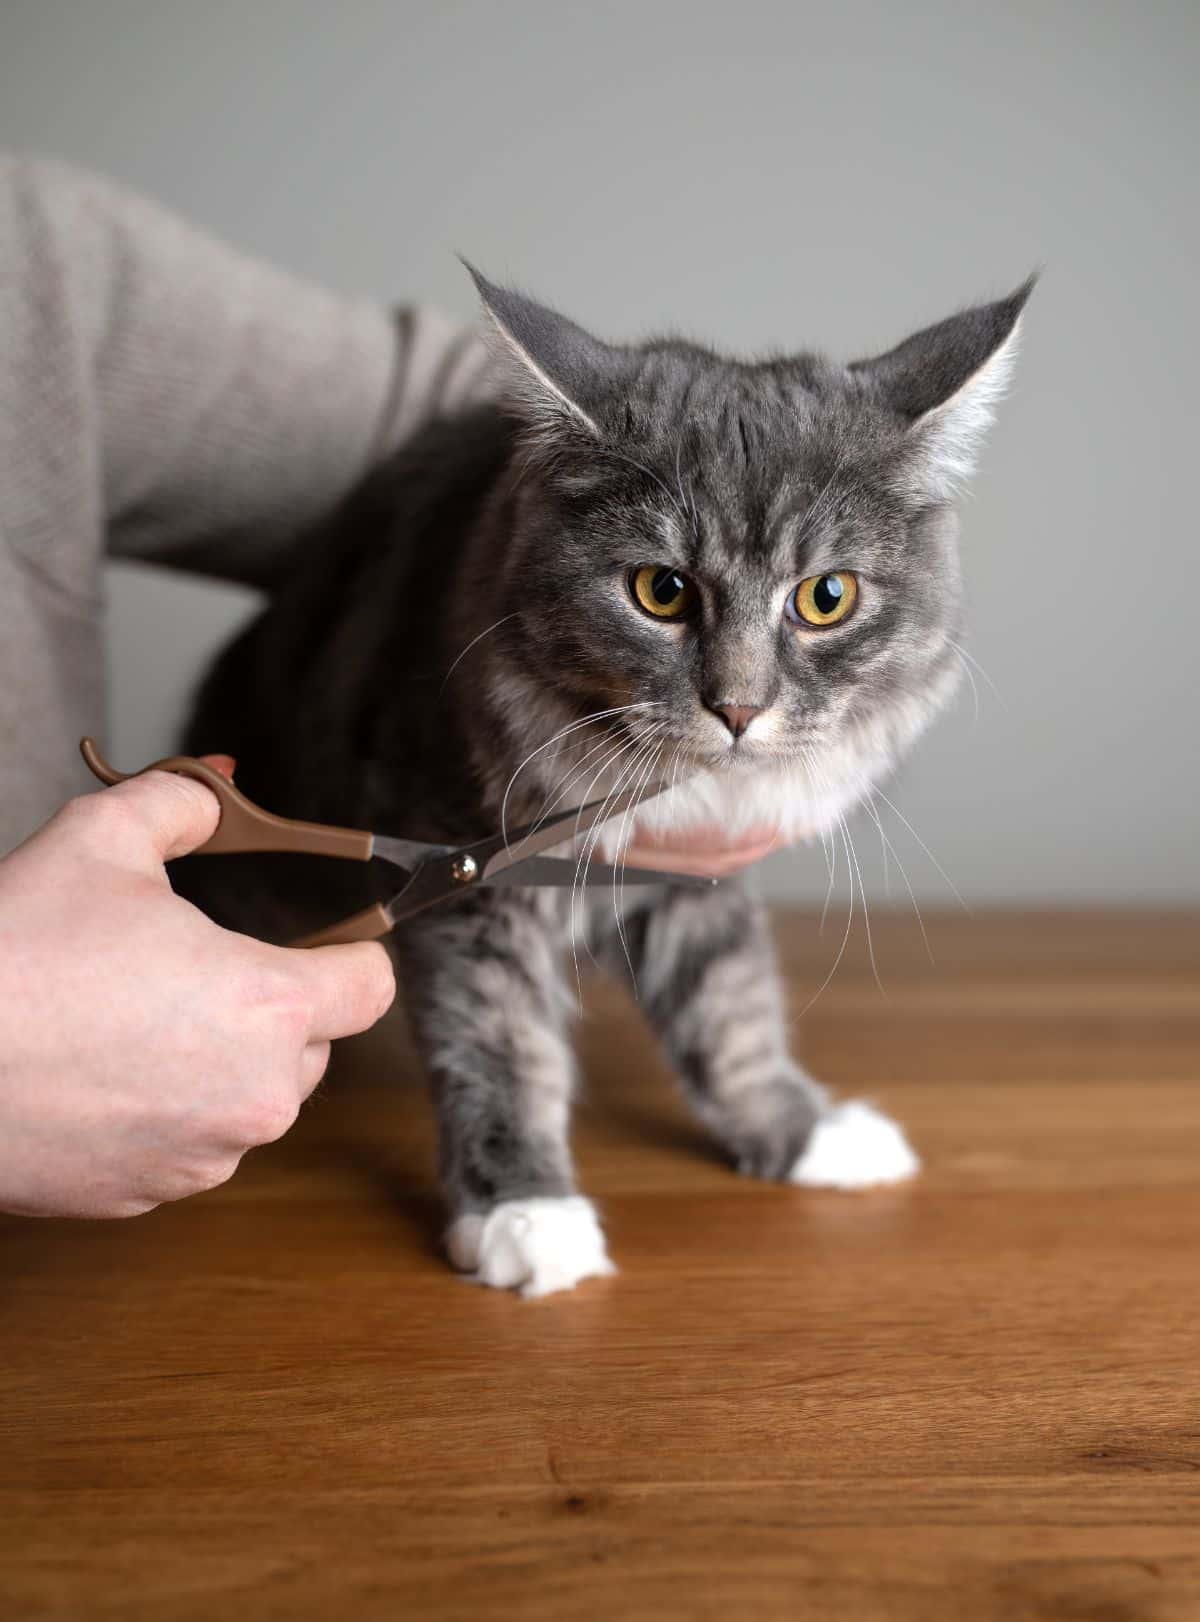 A maine coon being trimmed by scissors.